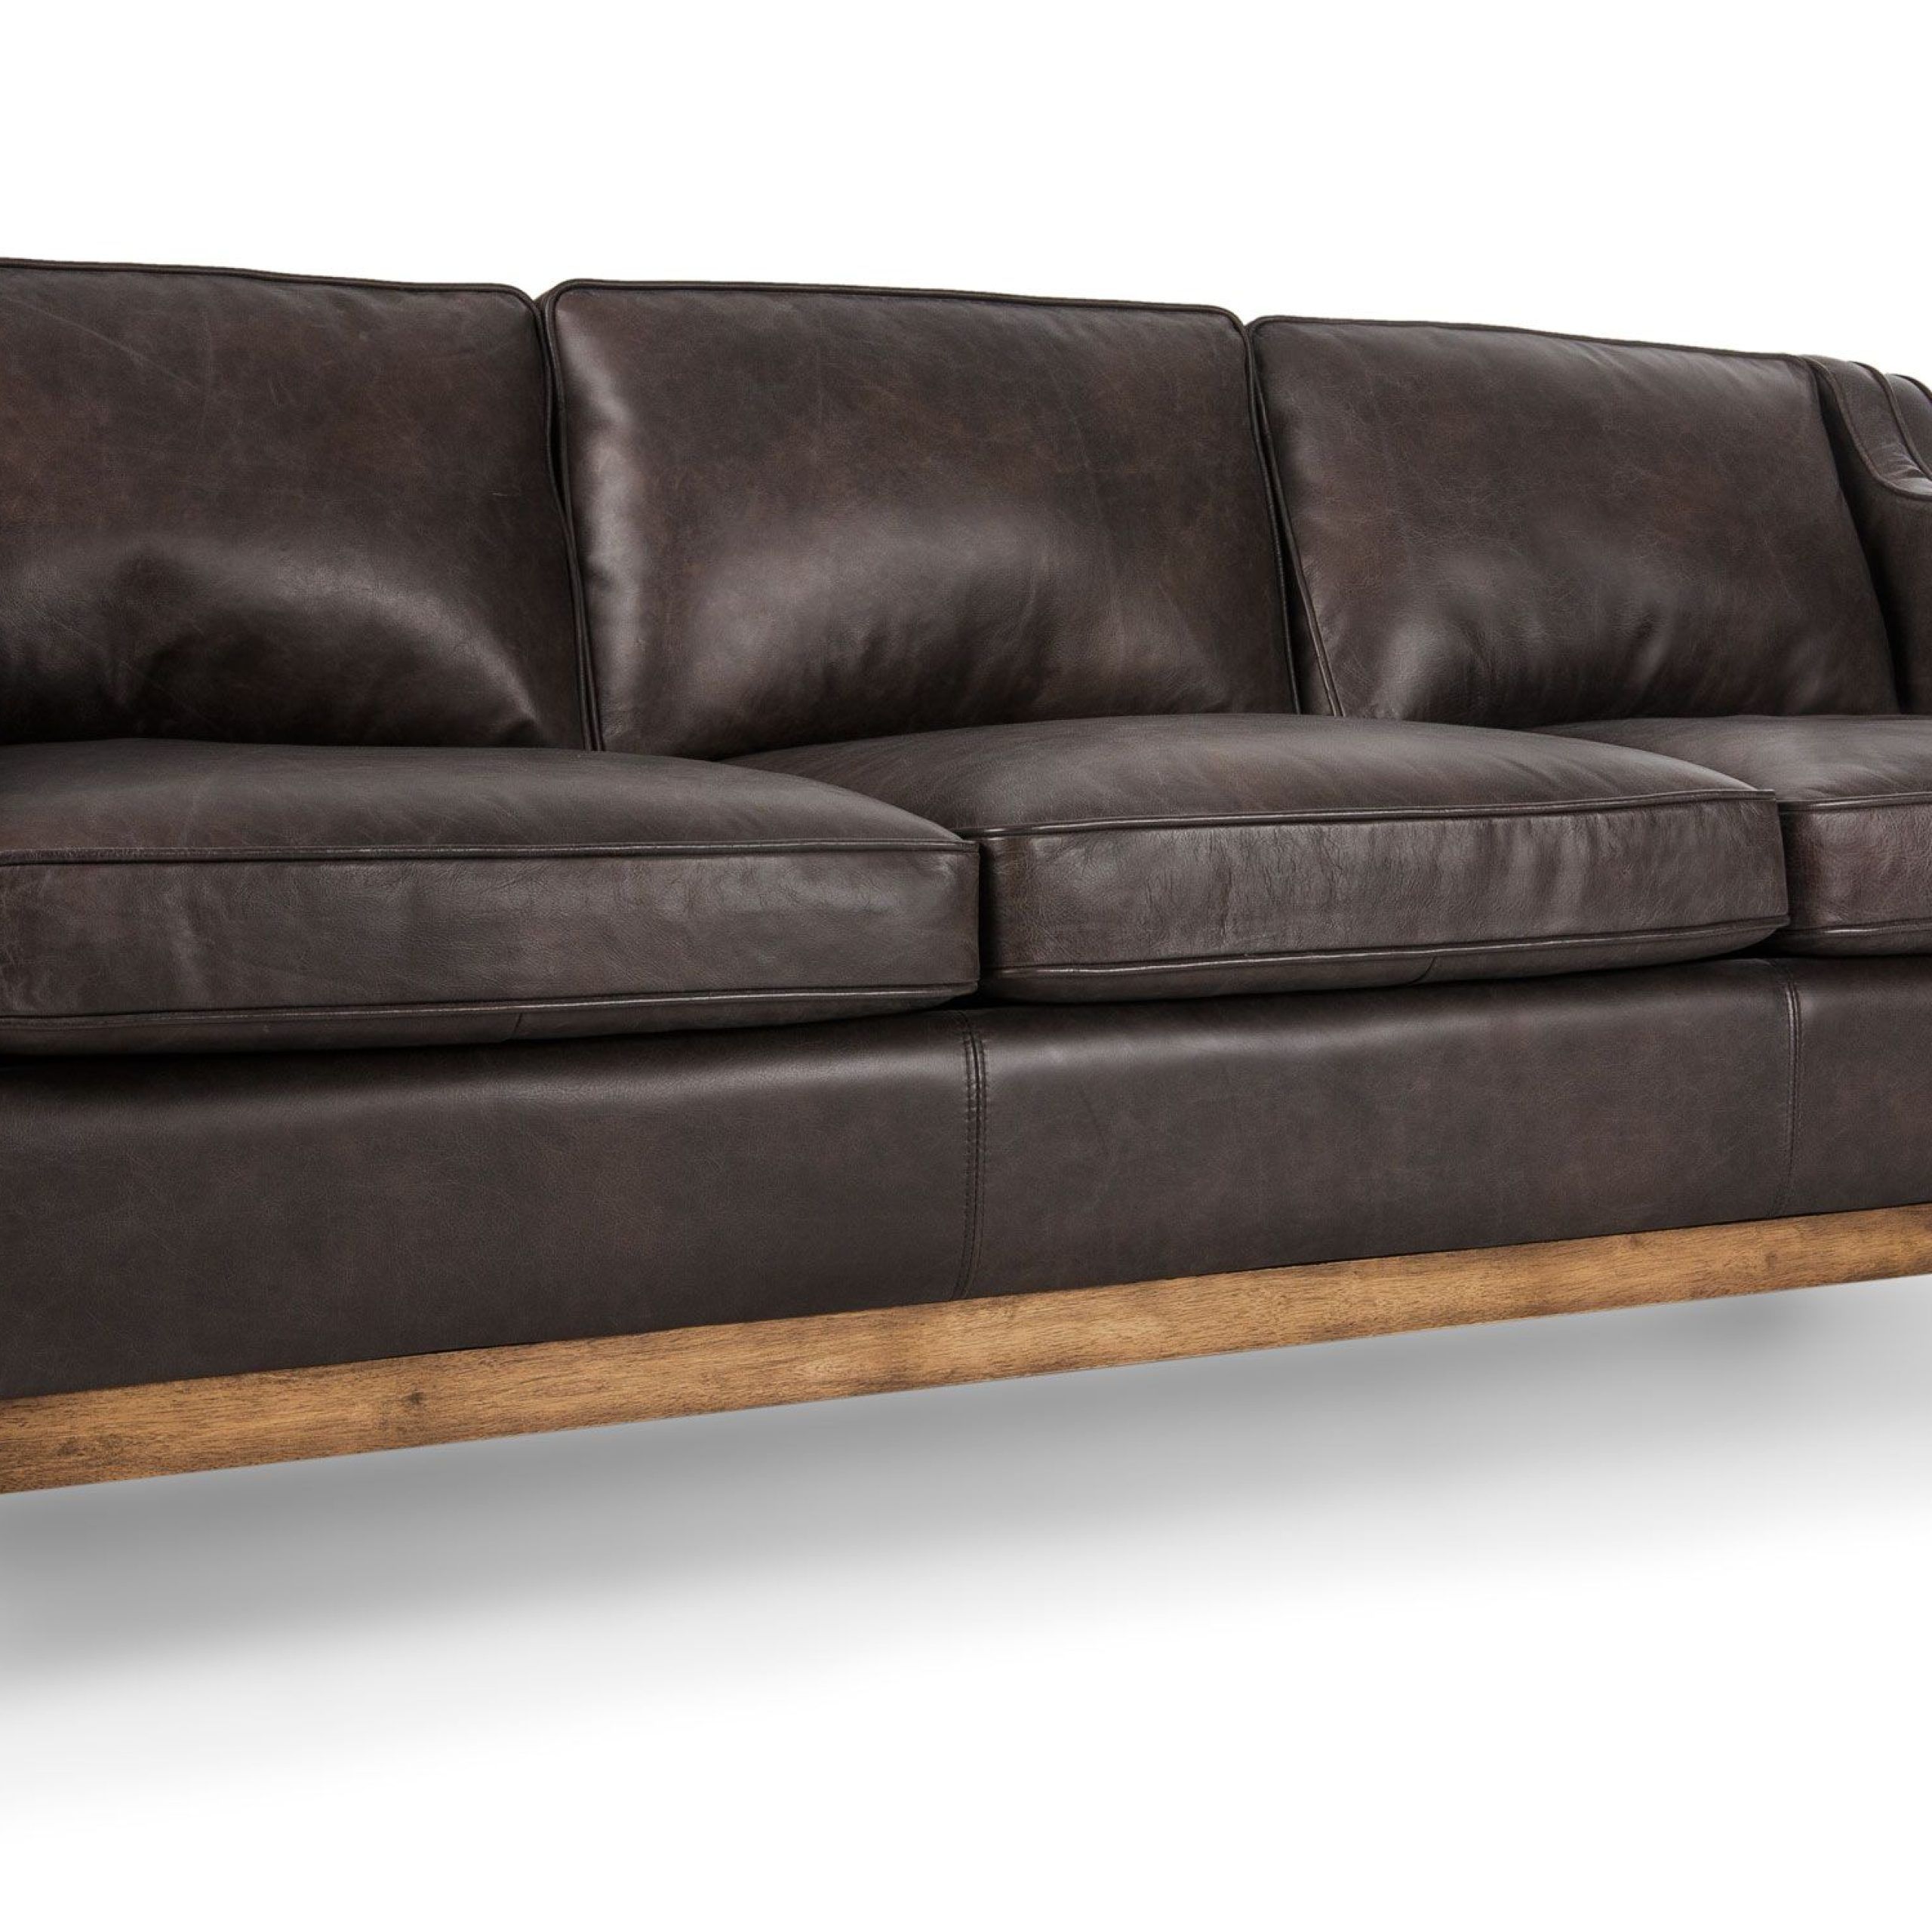 Well Known Sofas With Ottomans In Brown With Regard To Worthington Oxford Brown Sofa – Sofas & Ottomans – Bryght (View 12 of 15)